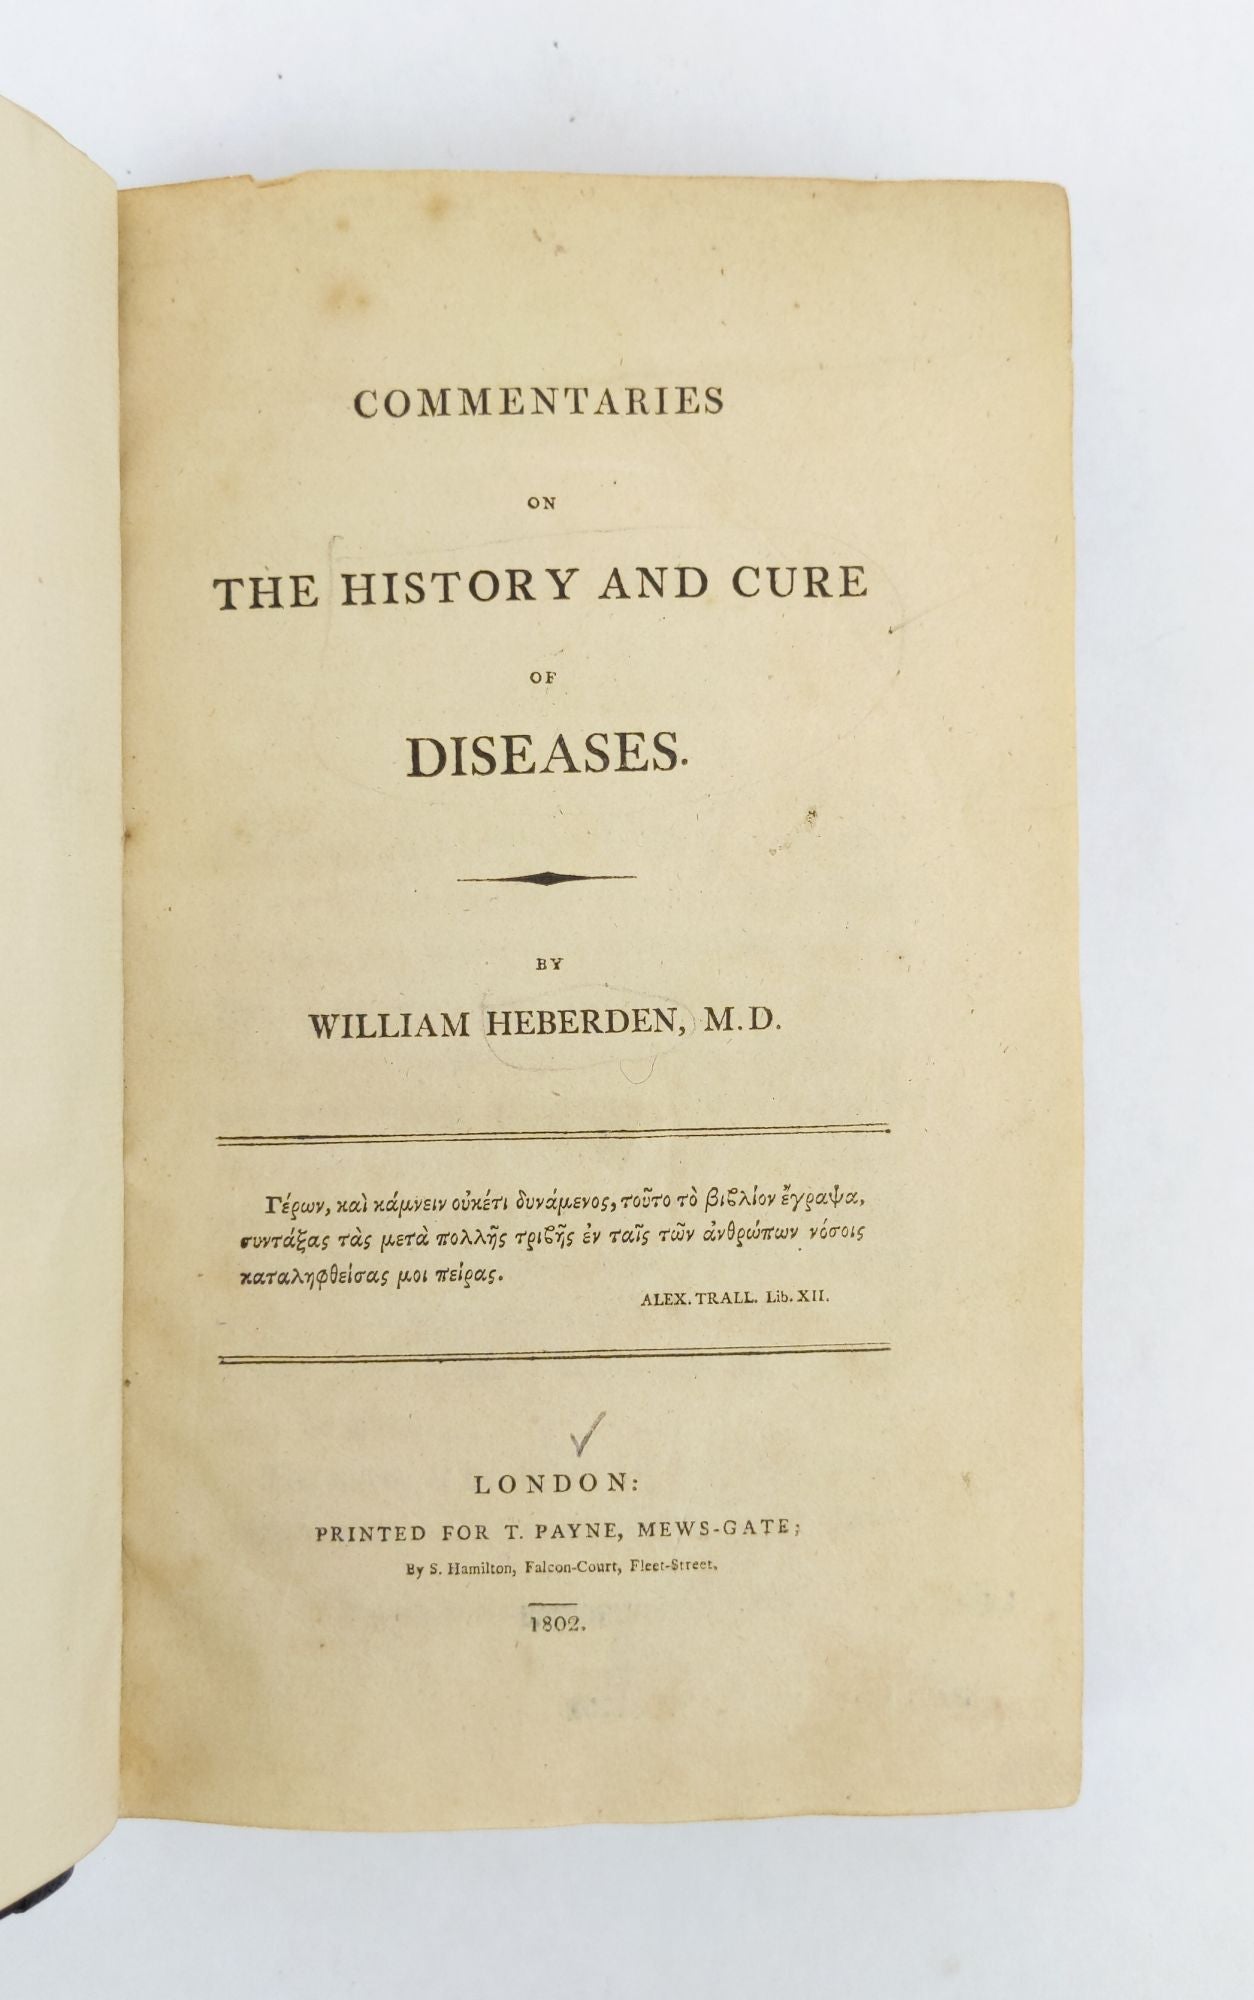 Product Image for COMMENTARIES ON THE HISTORY AND CURE OF DISEASE